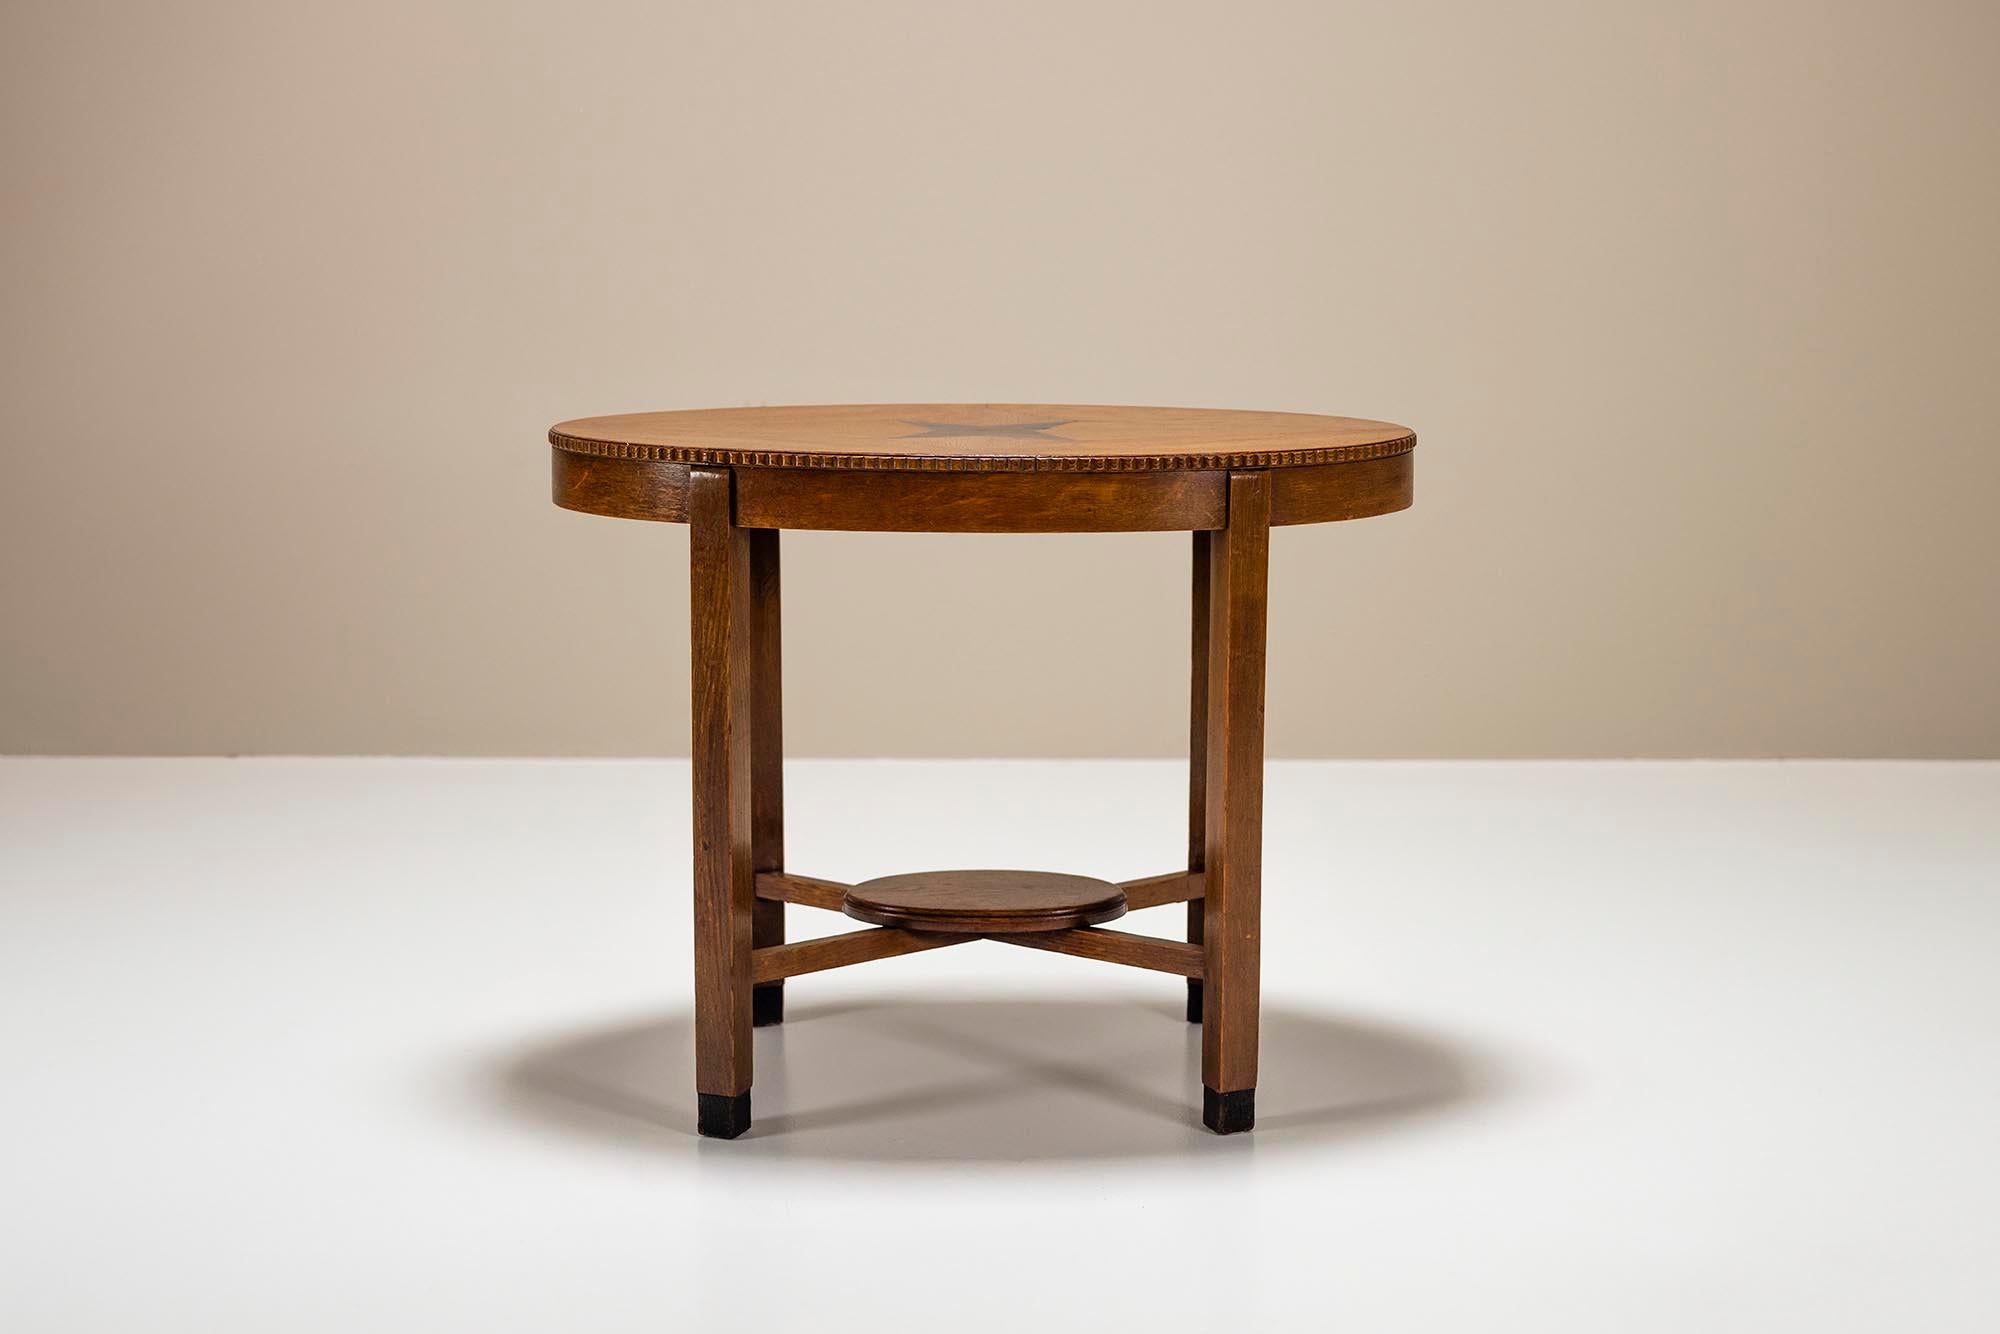 Crafted in the distinguished style of the Amsterdam School, this side table exudes elegance and sophistication. Carved from solid oak, its oval-shaped top is a testament to fine craftsmanship. At its center, a mesmerizing star-shaped ebony veneer